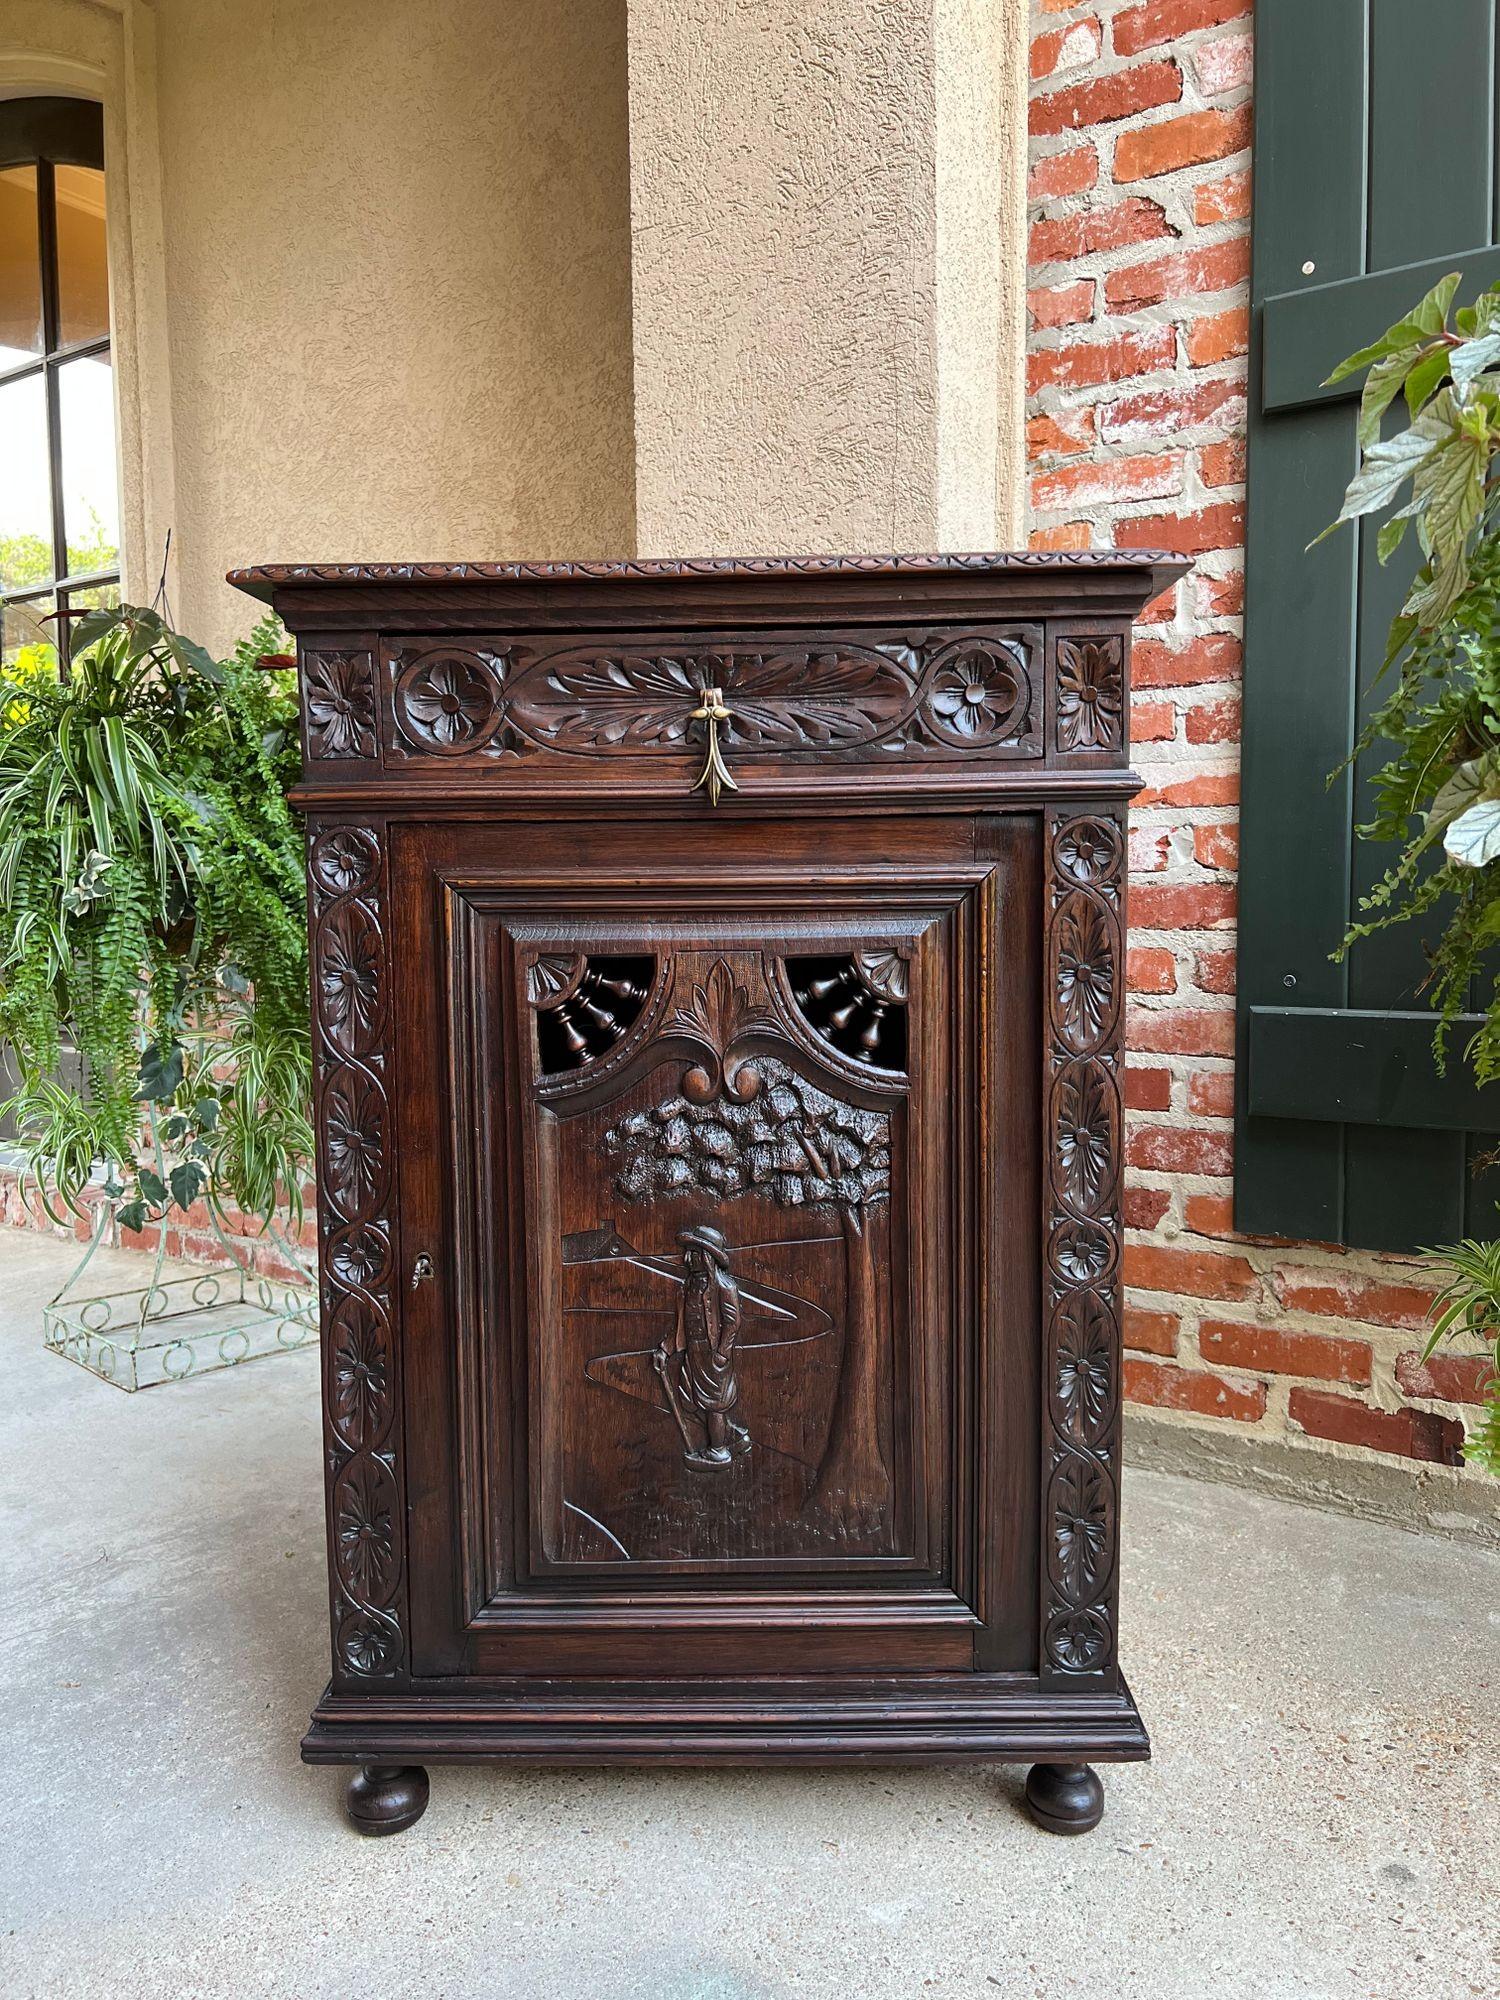 19th century antique French carved oak cabinet Breton Brittany wine bar sideboard.
 
Direct from the Brittany region of France, a lovely antique French ‘confiturier’ or jam cabinet. These cabinets are one of our most requested antiques, as they have